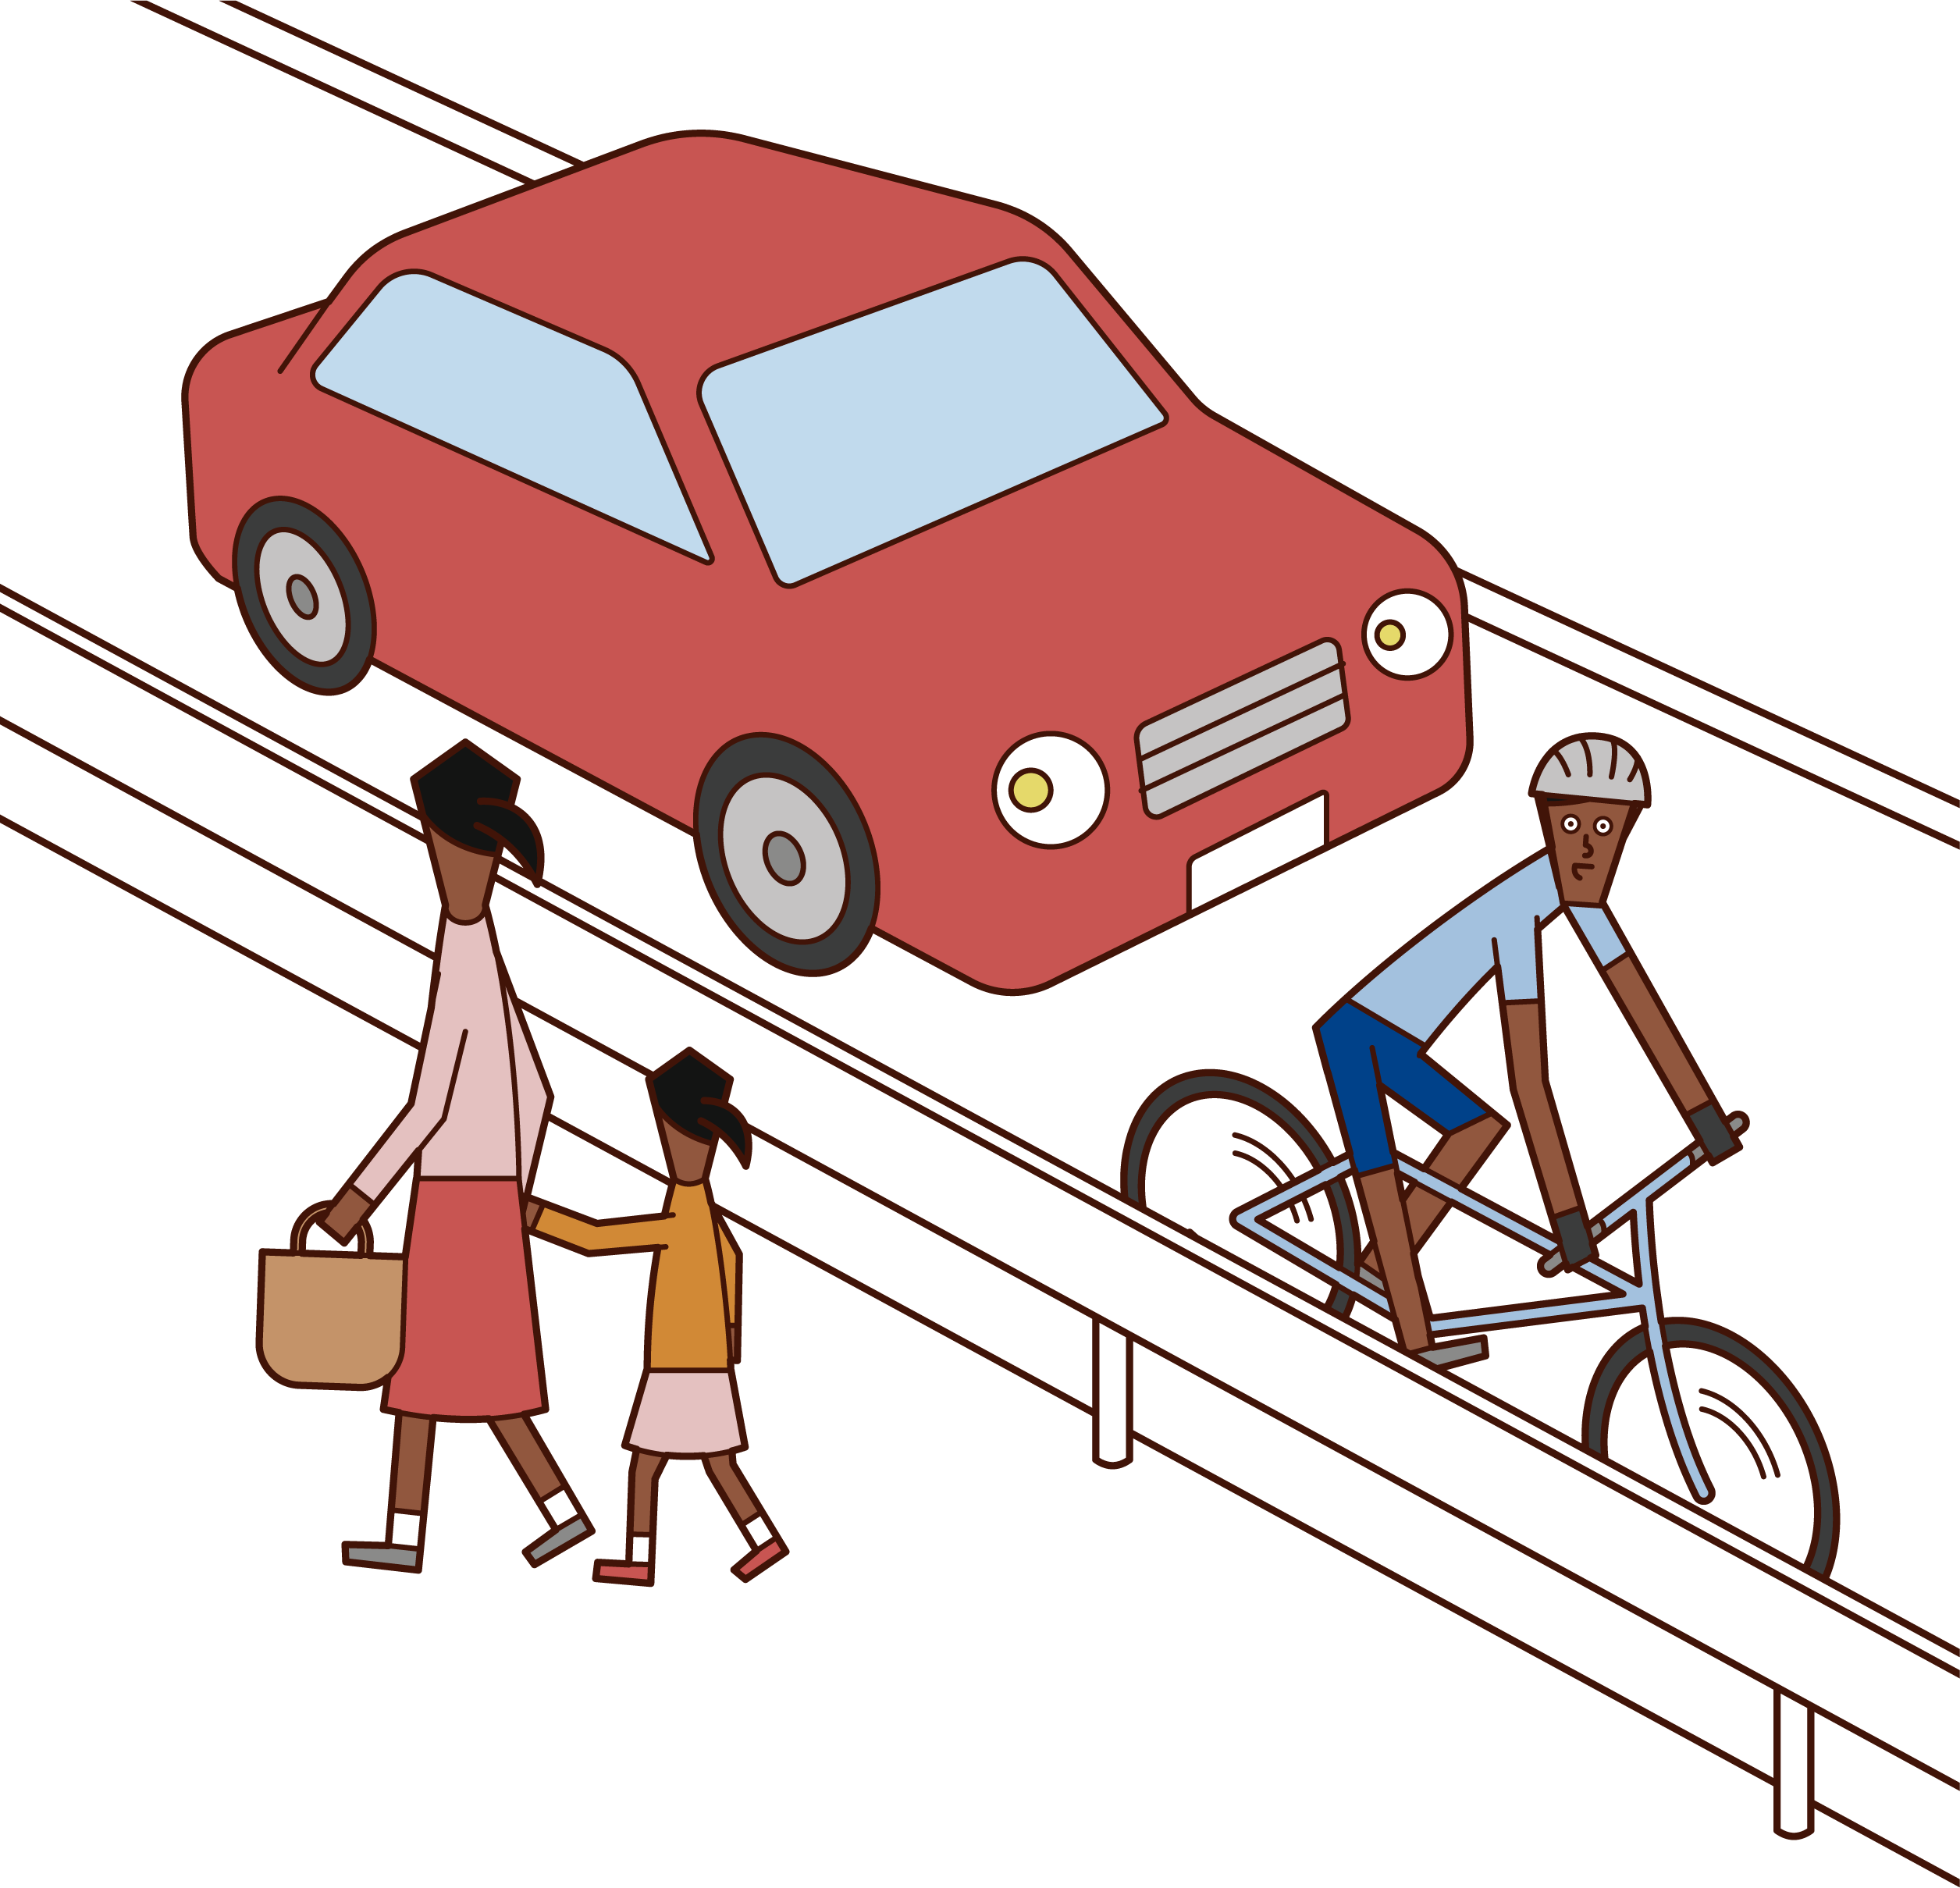 Illustration of a man riding on a bicycle on a driveway